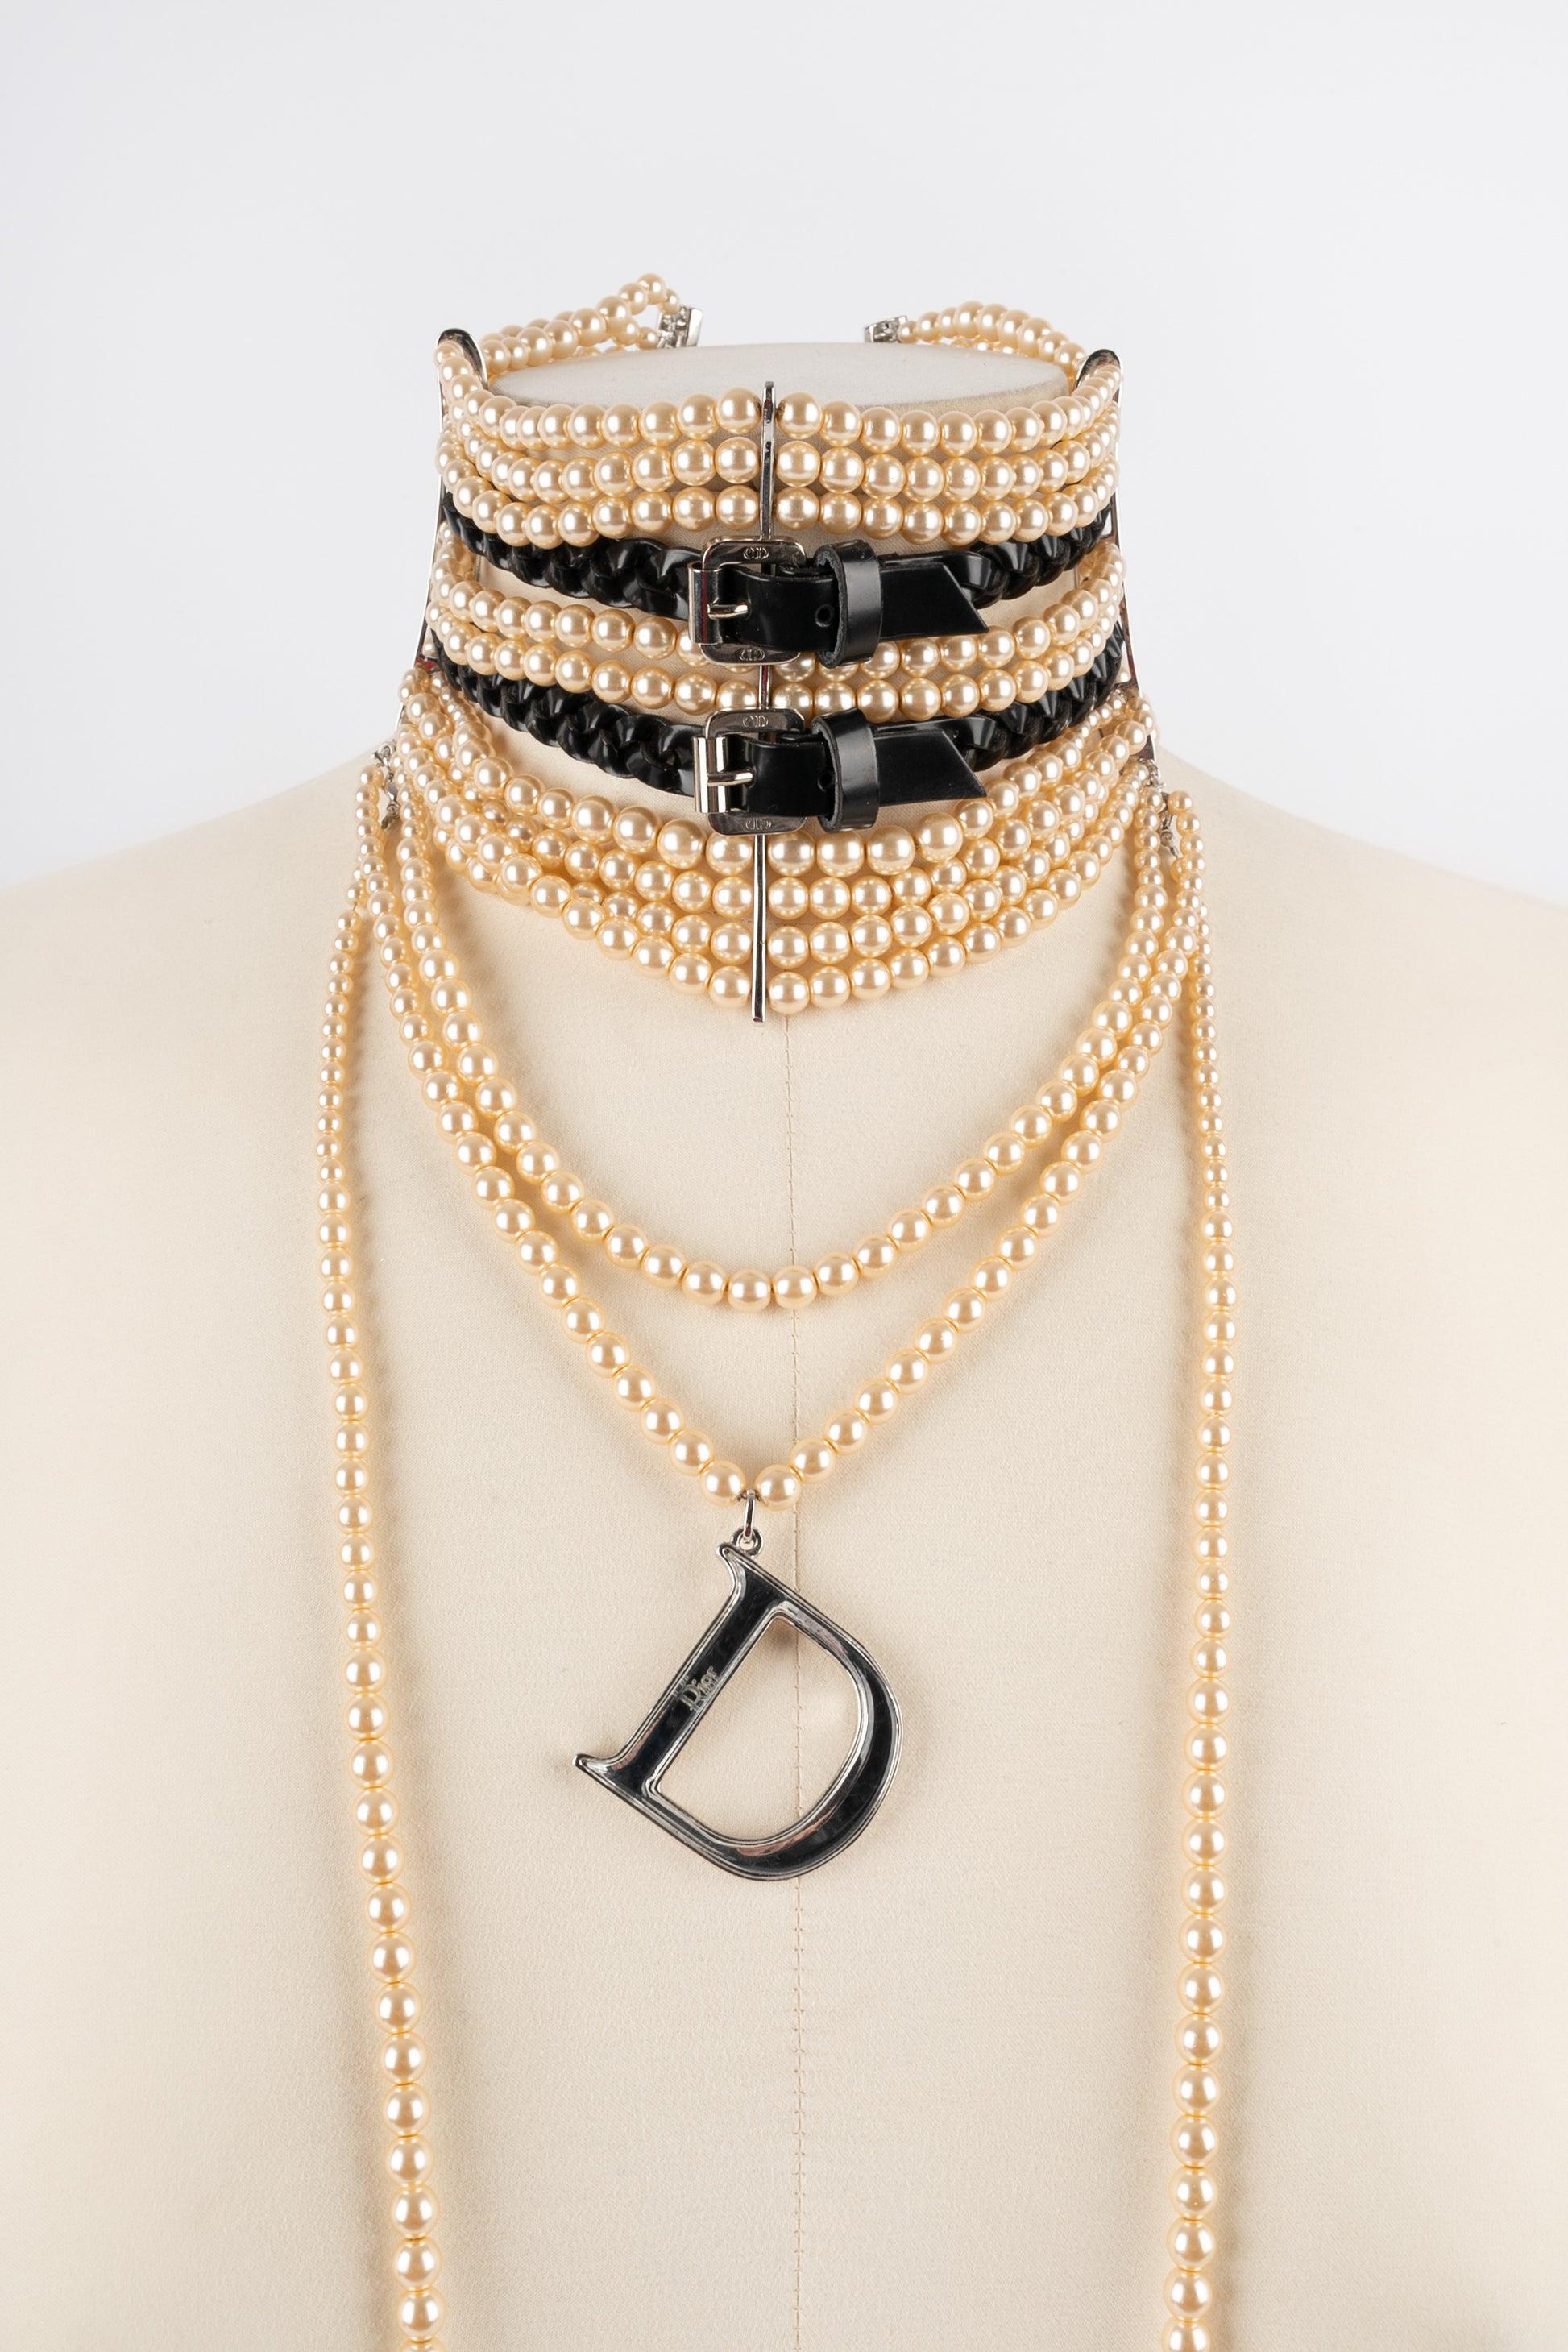 Dior - Silvery metal Massaï necklace with costume pearls and black leather. 2004 Spring-Summer Collection.
 
 Additional information: 
 Condition: Very good condition
 Dimensions: Length: from 29 cm to 34 cm
 Period: 21st Century
 
 Seller